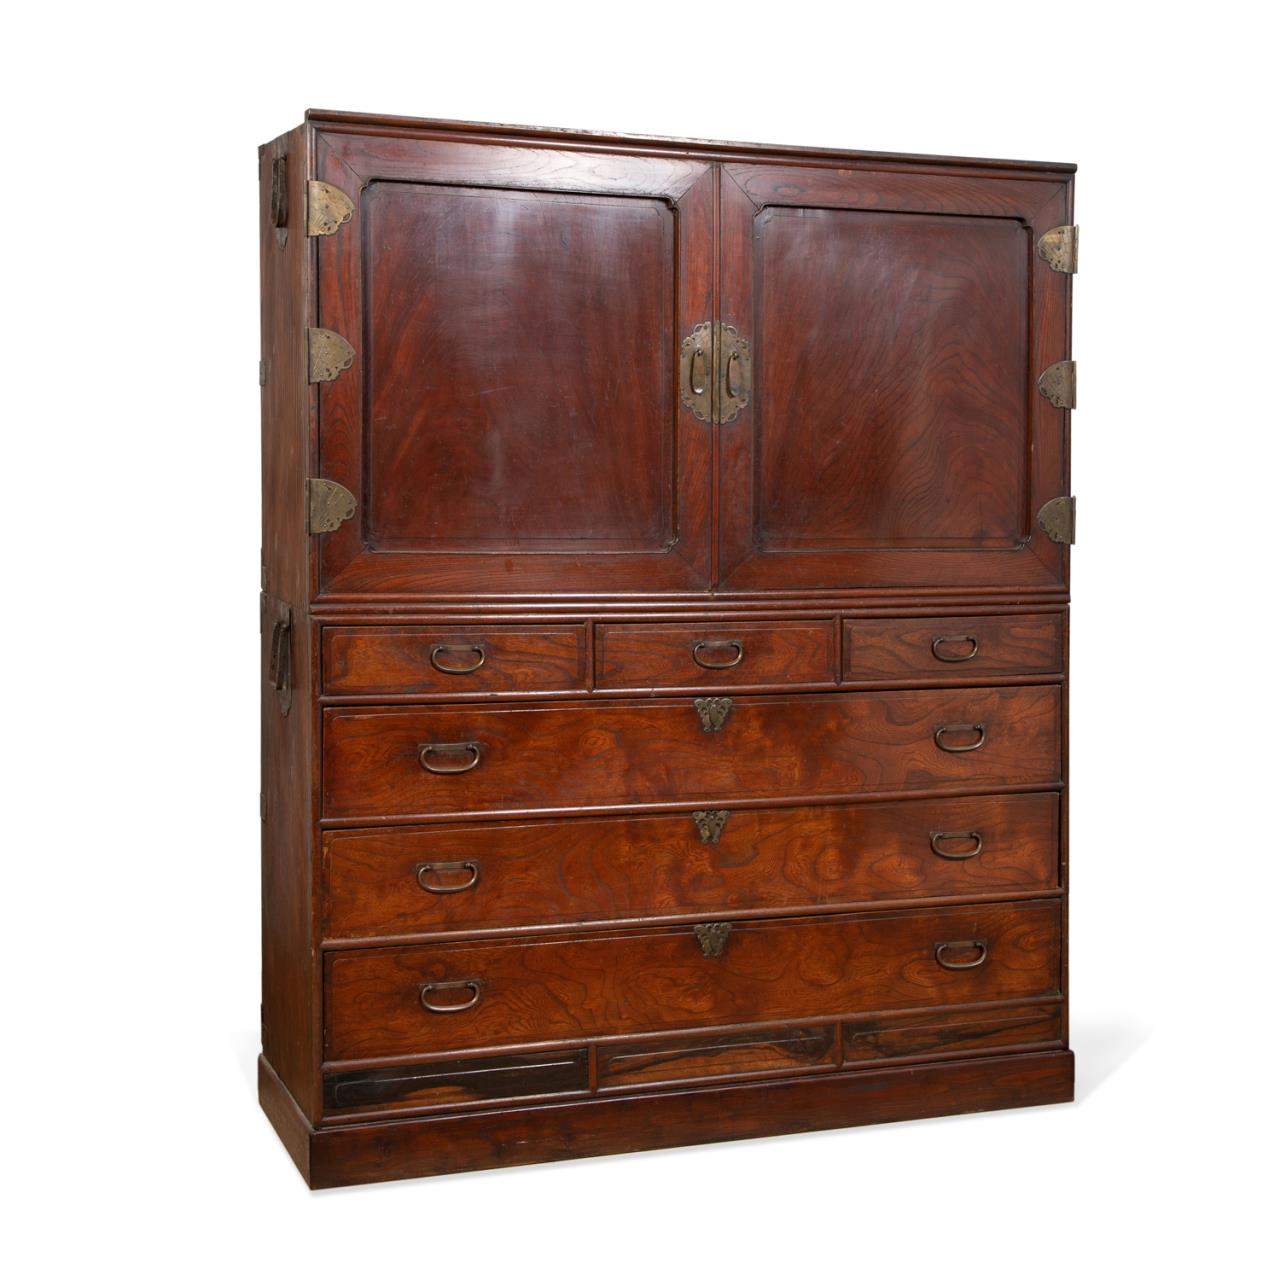 CHINESE RED STAINED WOOD CABINET 29f507